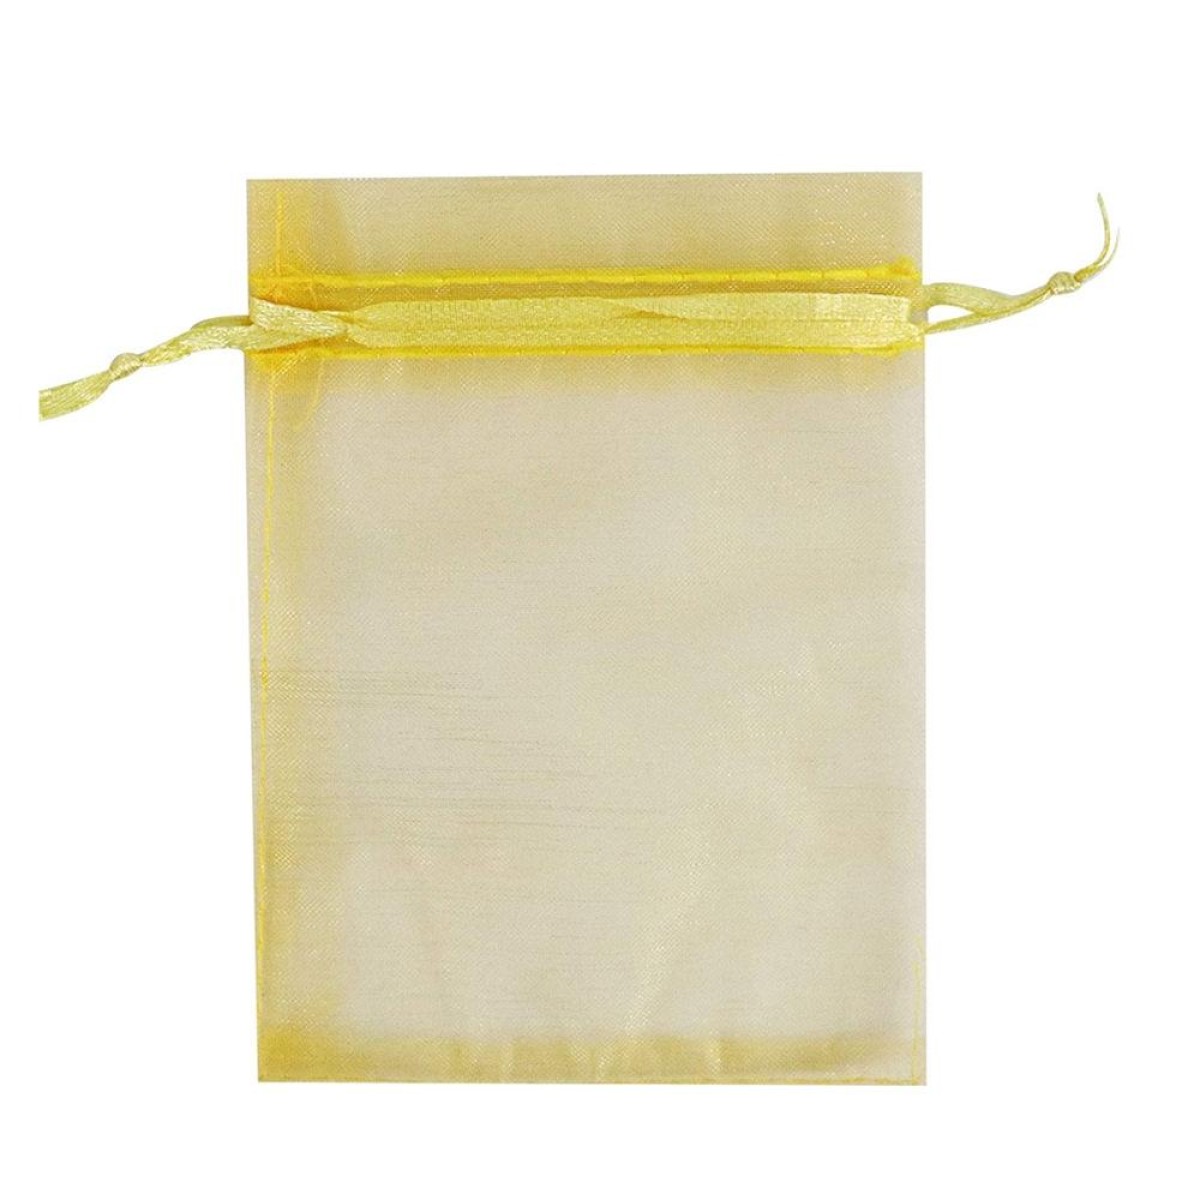 100pcs /Pack  Fruit Protection Bag Anti-Insect And Anti-Bird Net Bag 7 x 9cm(Gold)